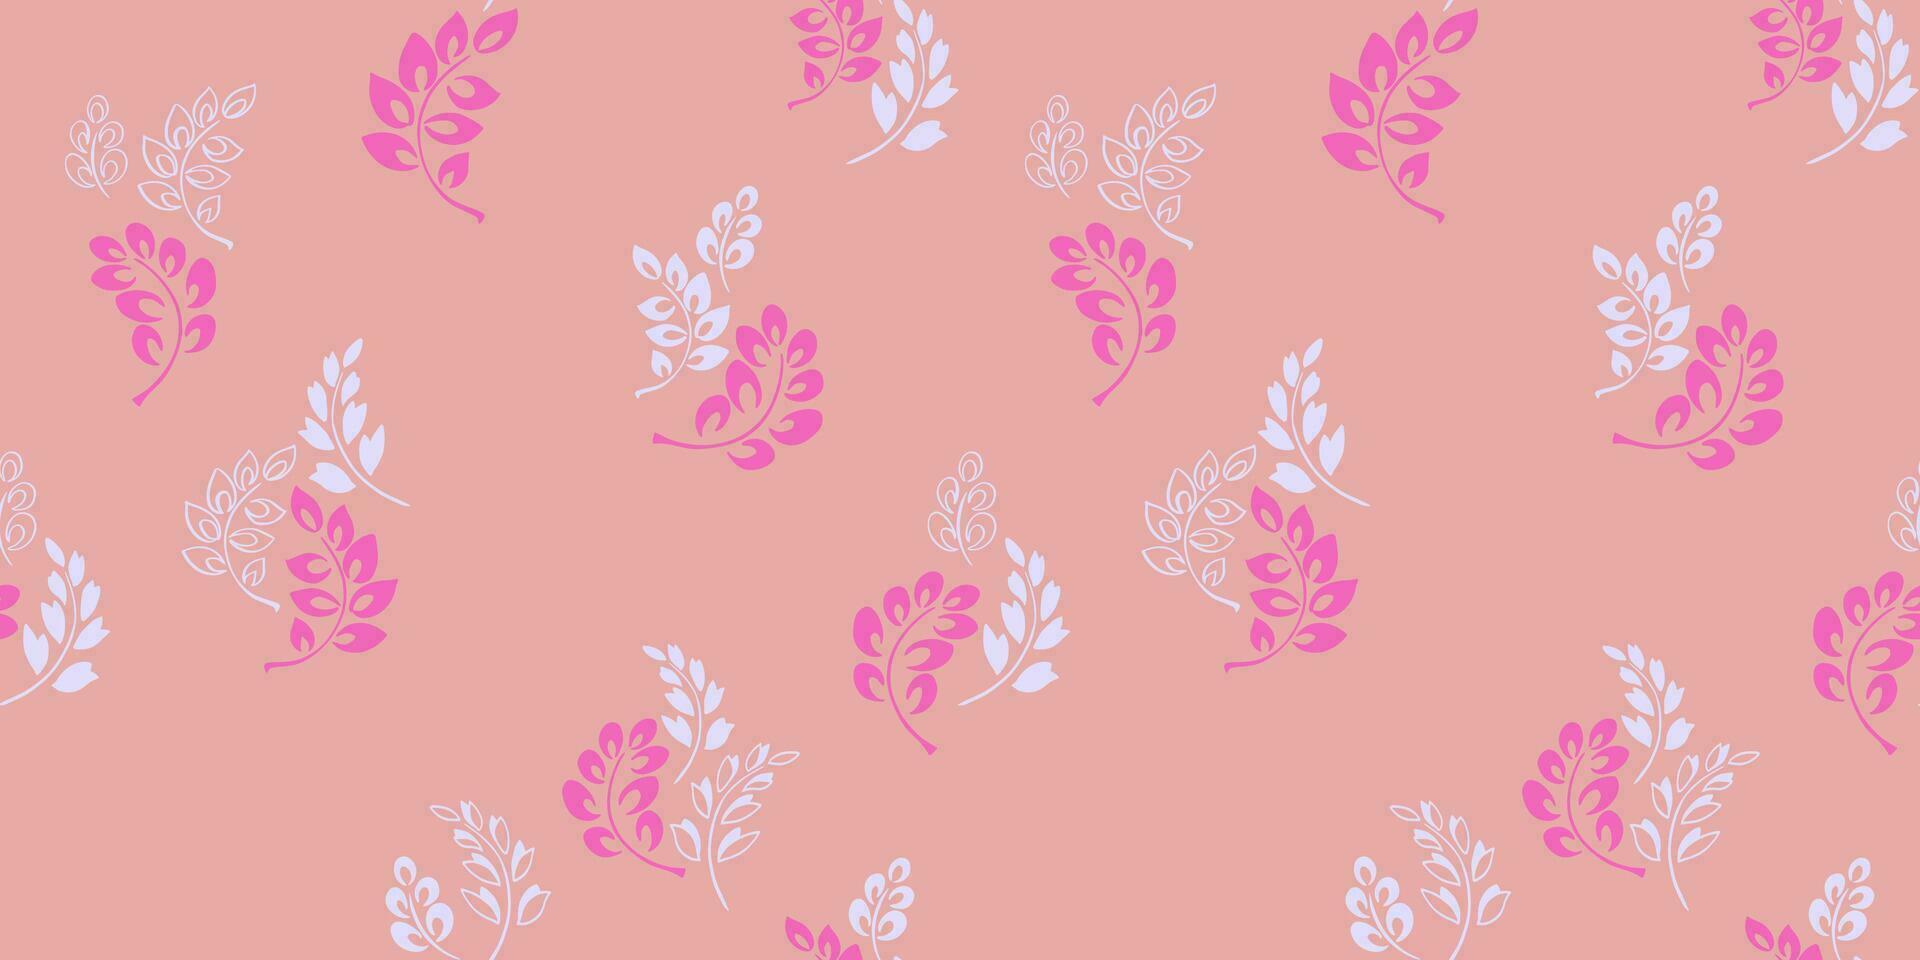 Seamless pattern with hand drawn abstract  tiny branches leaves on the pink background. Vector design ornament for paper, cover, fabric, interior decor, textile, wallpaper, surface design, fashion